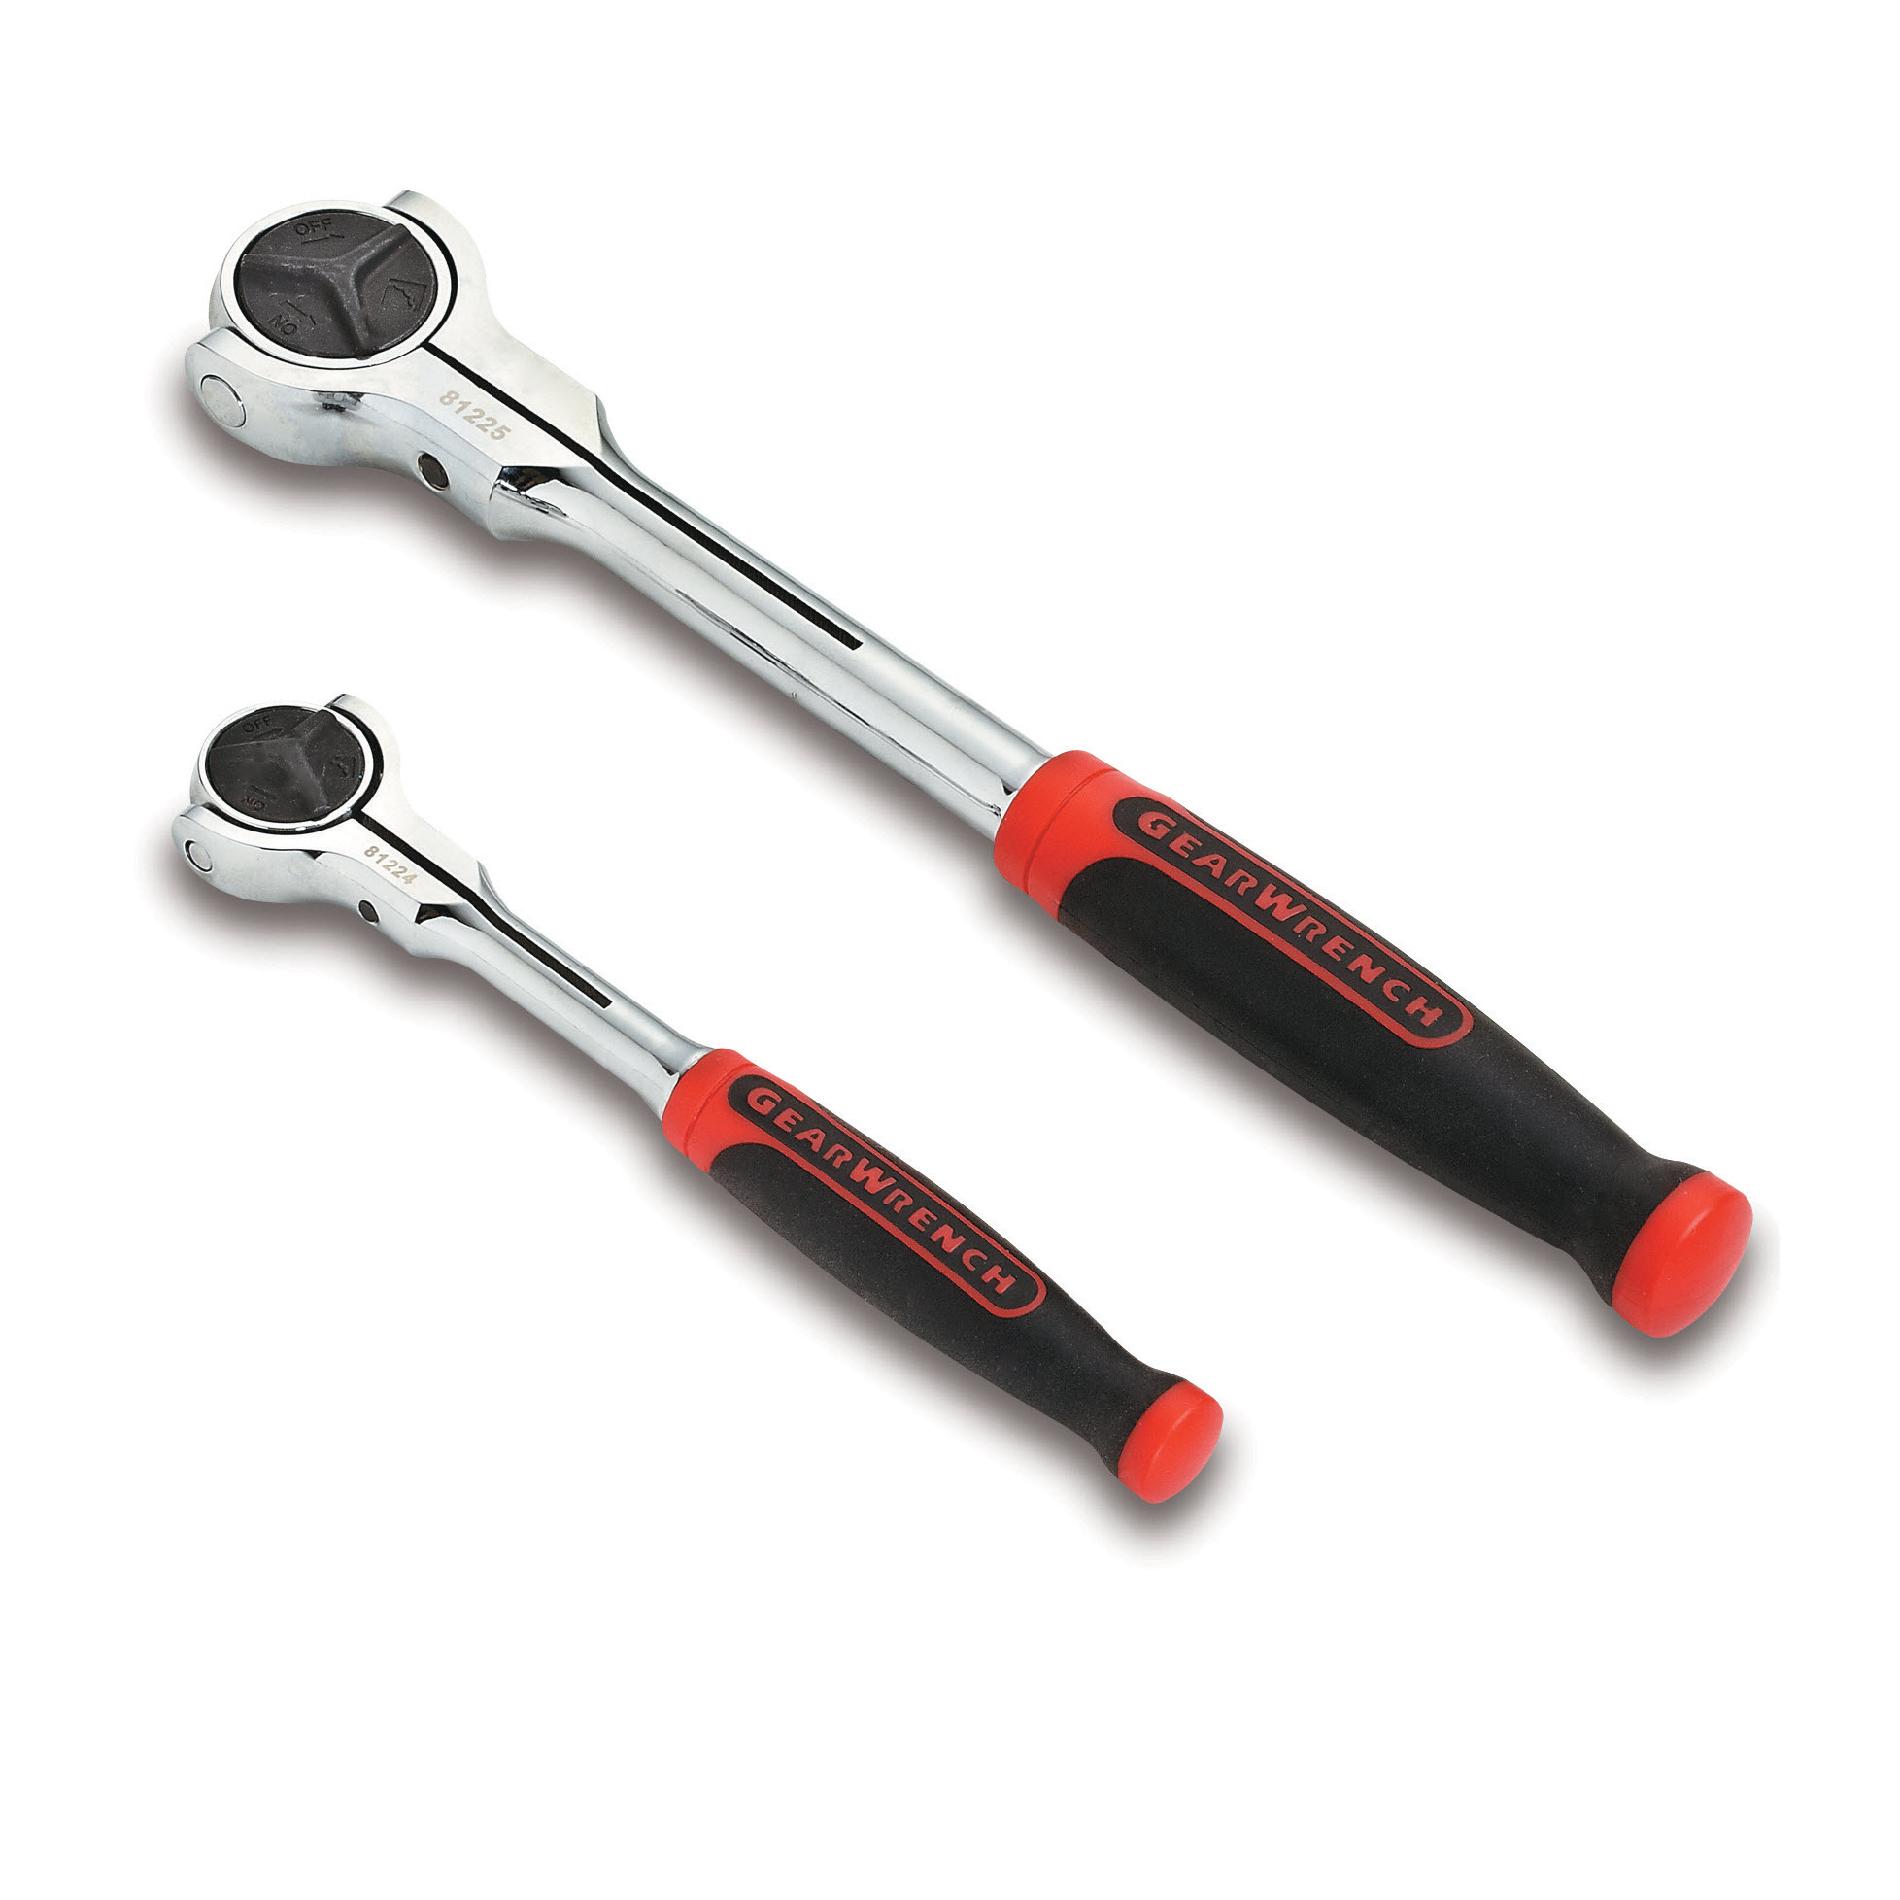 Ratchet tools. Трещетка GEARWRENCH. Ratchet device. GEARWRENCH инструмент клещи. Easyflex инструмент.